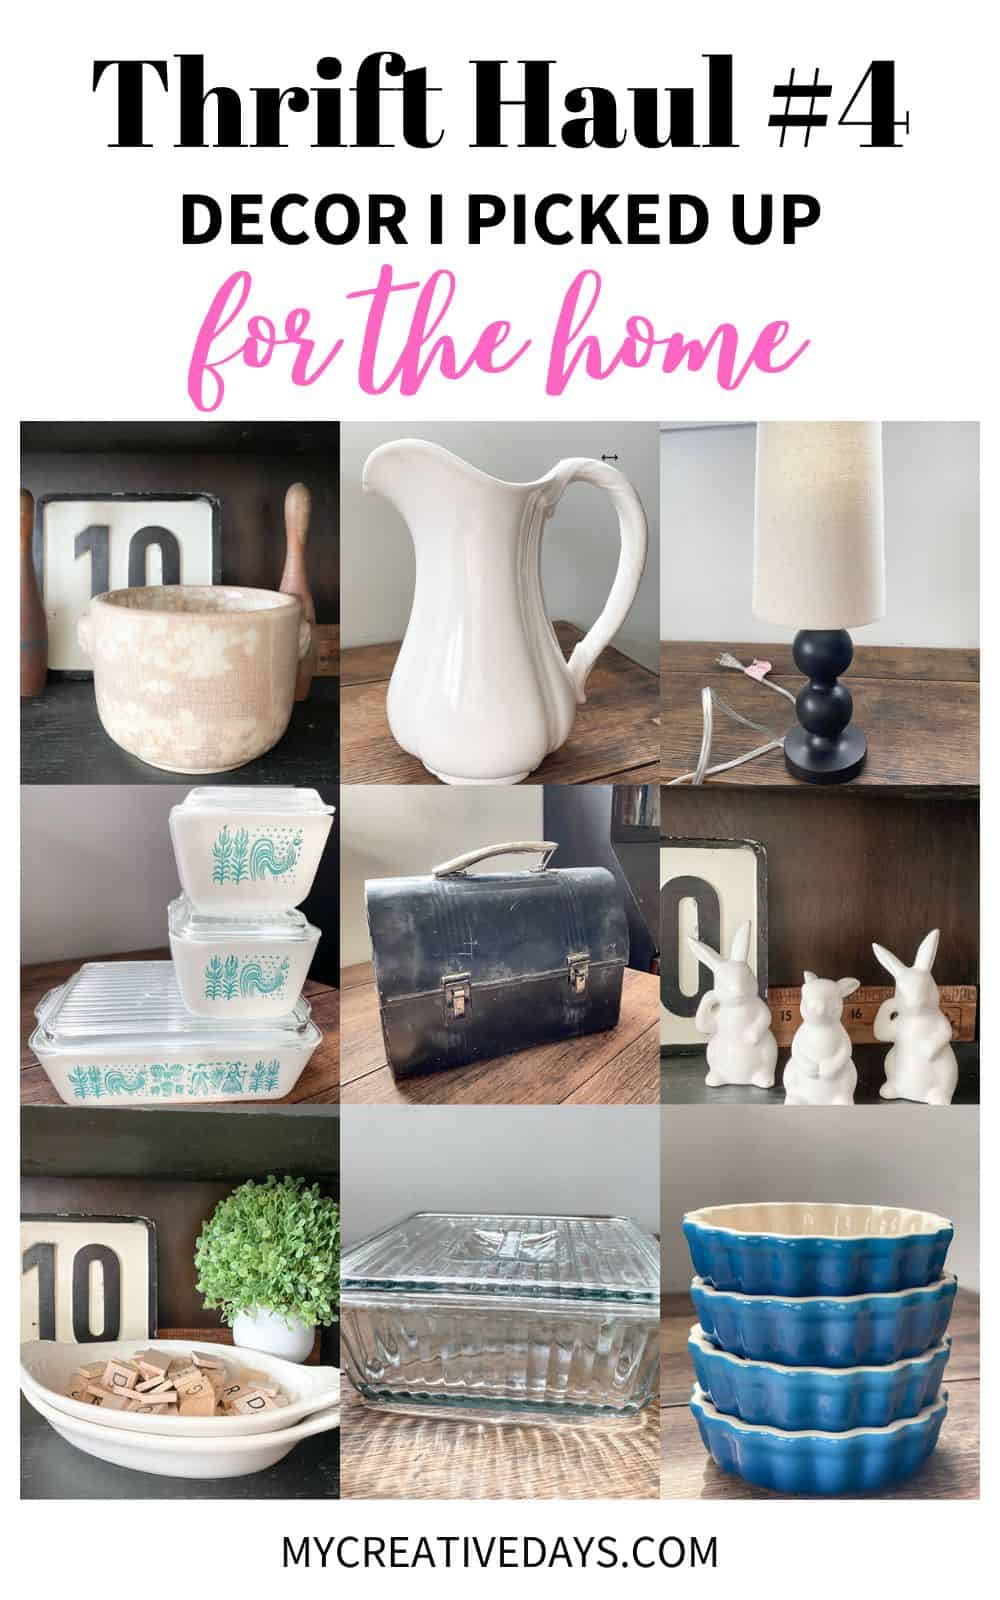 Shopping thrift stores for home decor is so much fun. In this thrift haul 4, I am sharing what I picked up on this trip to decorate the home.